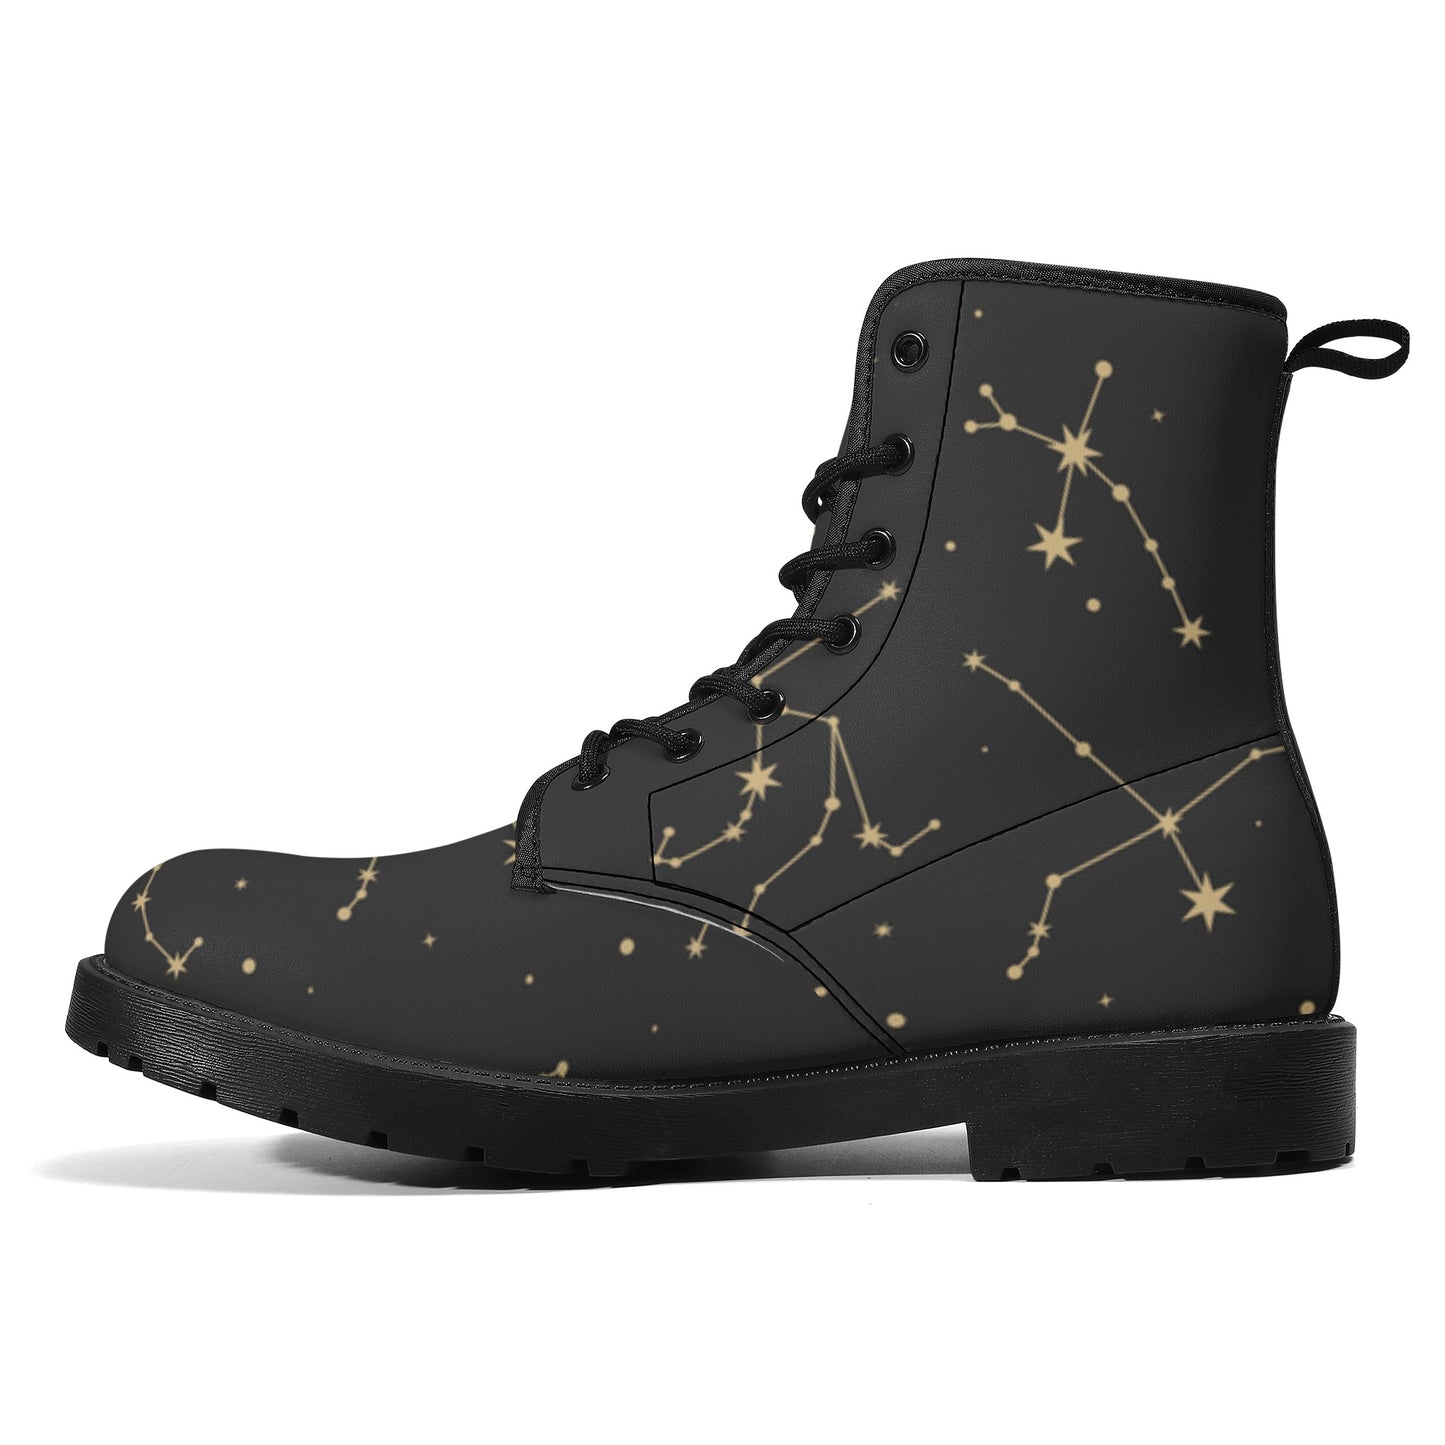 Constellation Women Leather Boots, Stars Space Vegan Lace Up Shoes Hiking Festival Black Ankle Combat Work Winter Waterproof Custom Ladies